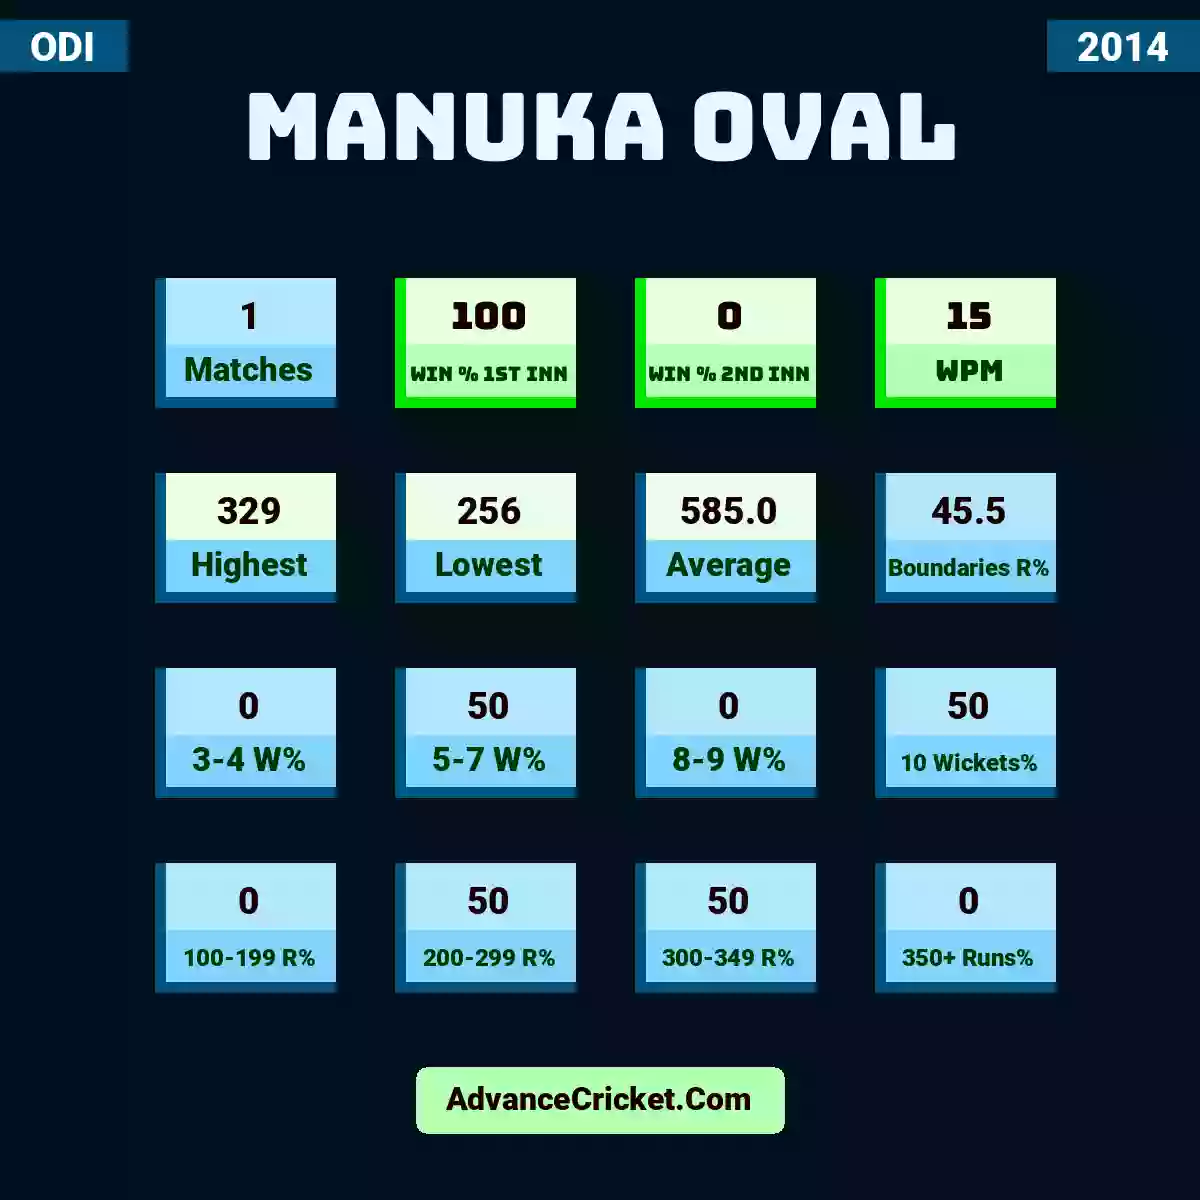 Image showing Manuka Oval with Matches: 1, Win % 1st Inn: 100, Win % 2nd Inn: 0, WPM: 15, Highest: 329, Lowest: 256, Average: 585.0, Boundaries R%: 45.5, 3-4 W%: 0, 5-7 W%: 50, 8-9 W%: 0, 10 Wickets%: 50, 100-199 R%: 0, 200-299 R%: 50, 300-349 R%: 50, 350+ Runs%: 0.